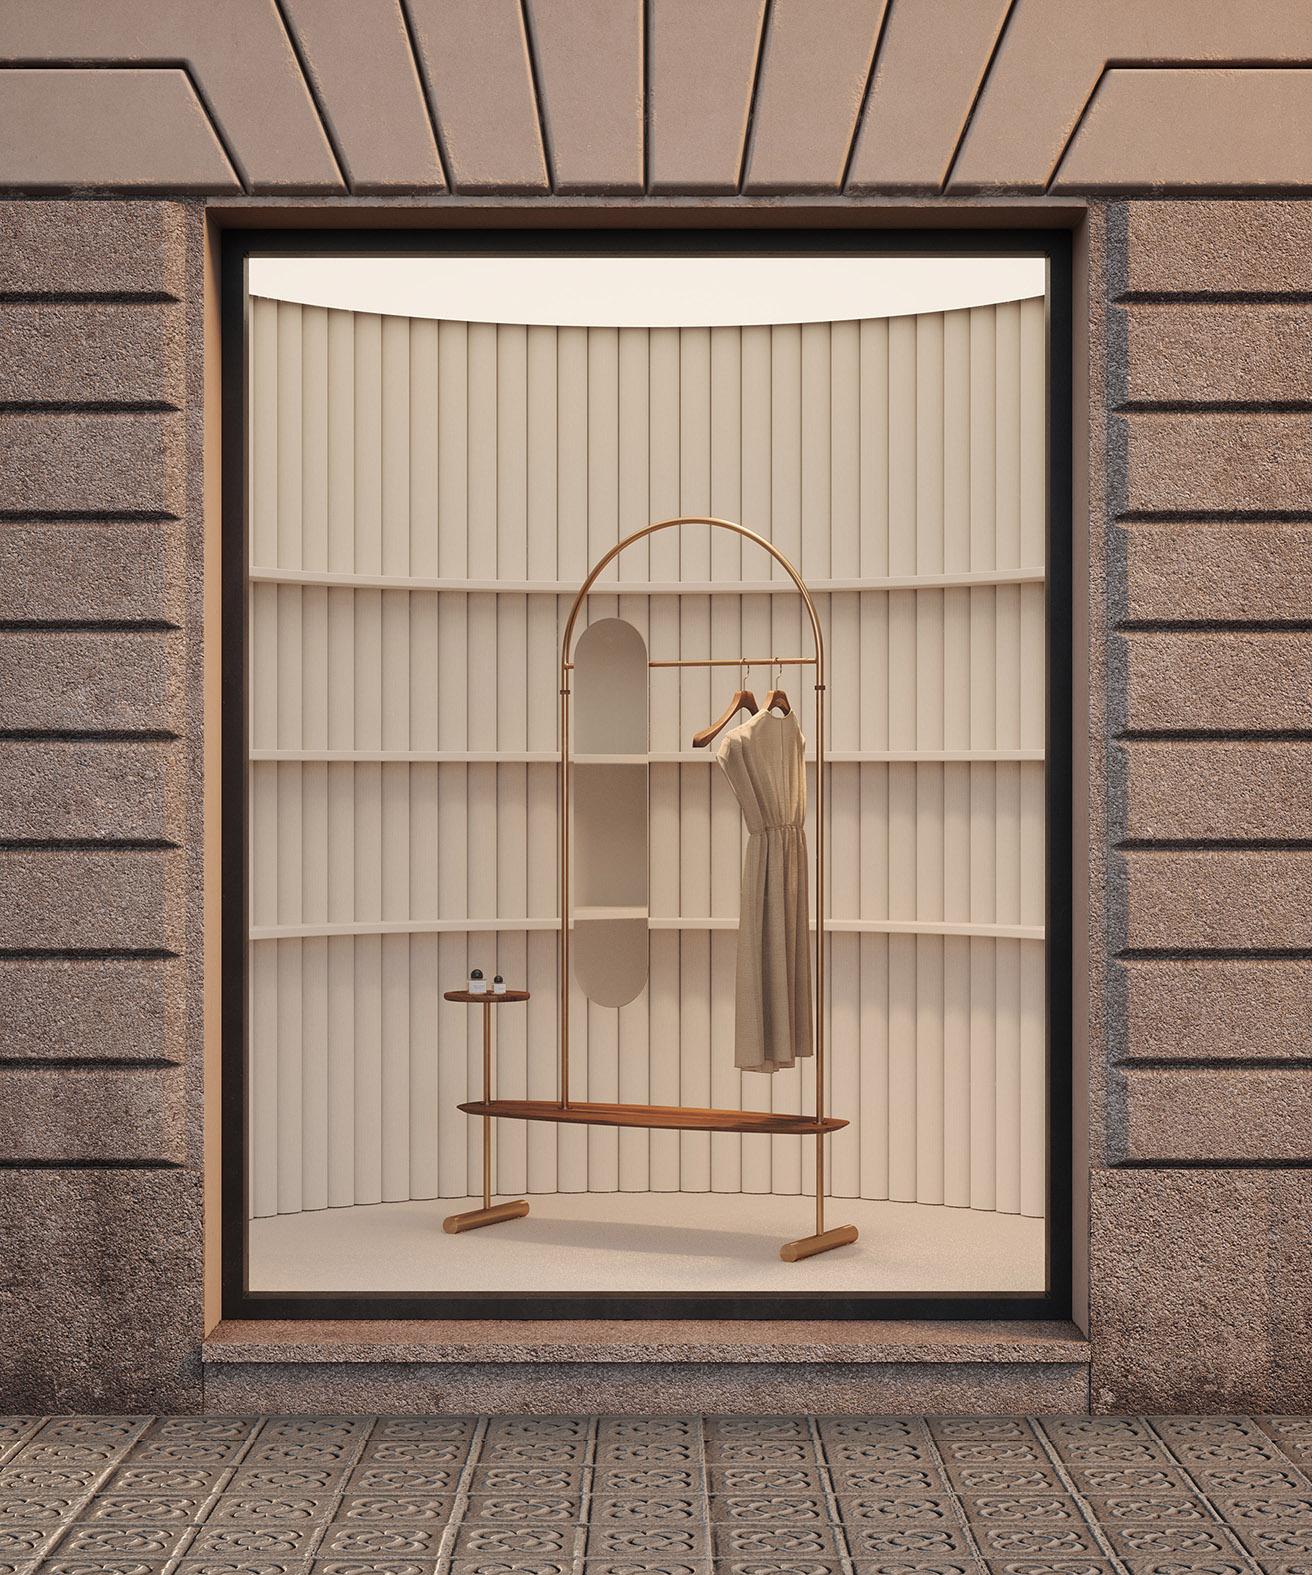 Elegant and minimalist, the Arco Clothing Rack includes a long oval mirror, wood veneer shelf, a small tray and two wooden hangers. Designed and produced in Spain with natural materials and organic shapes, the clothing rack is available with either